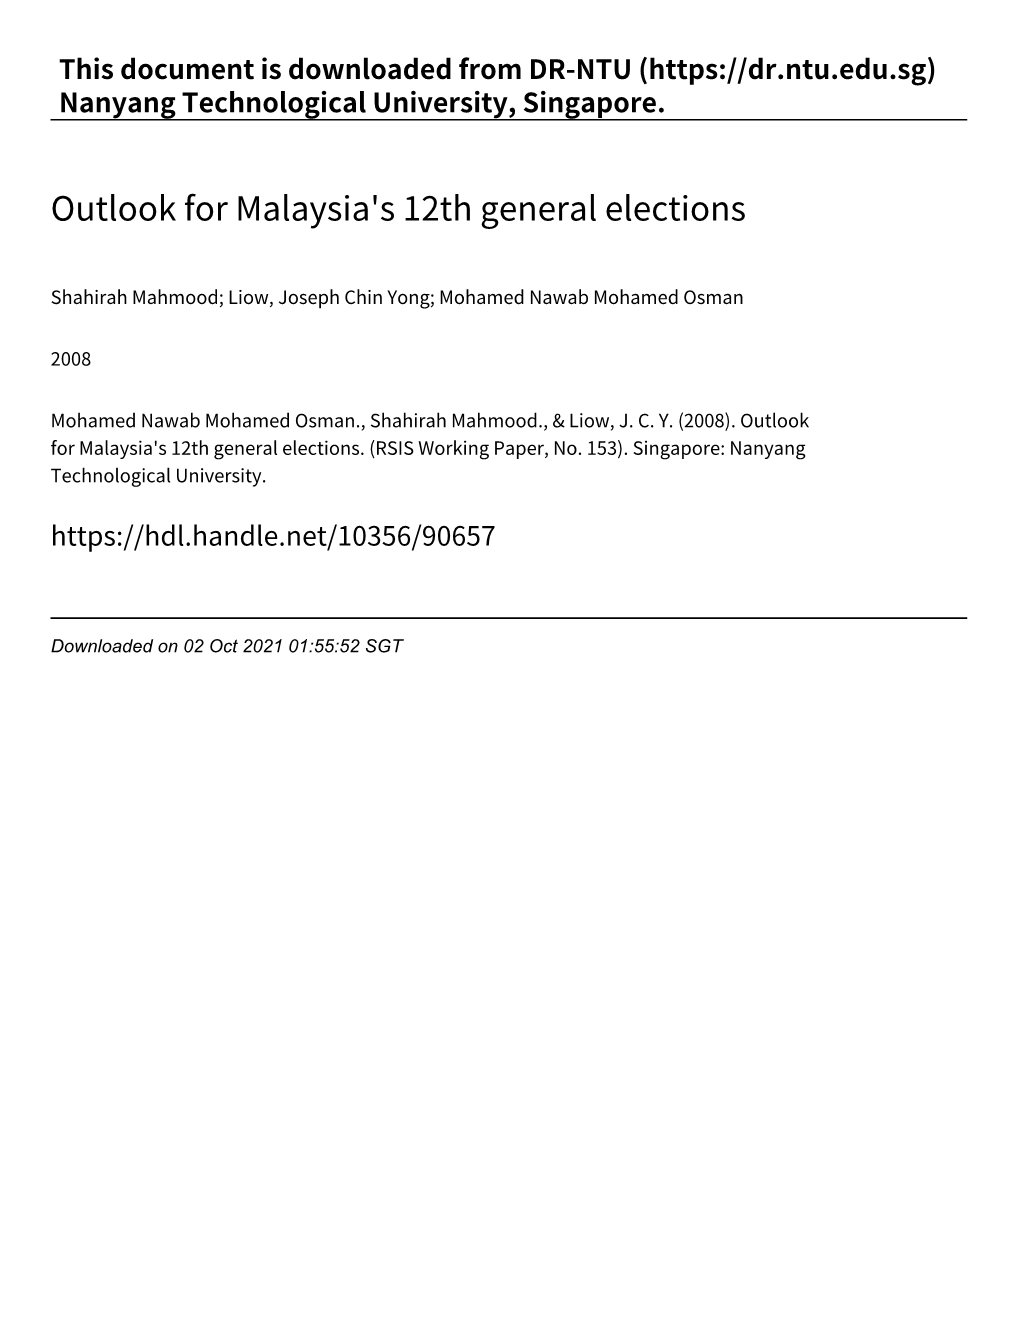 Outlook for Malaysia's 12Th General Elections